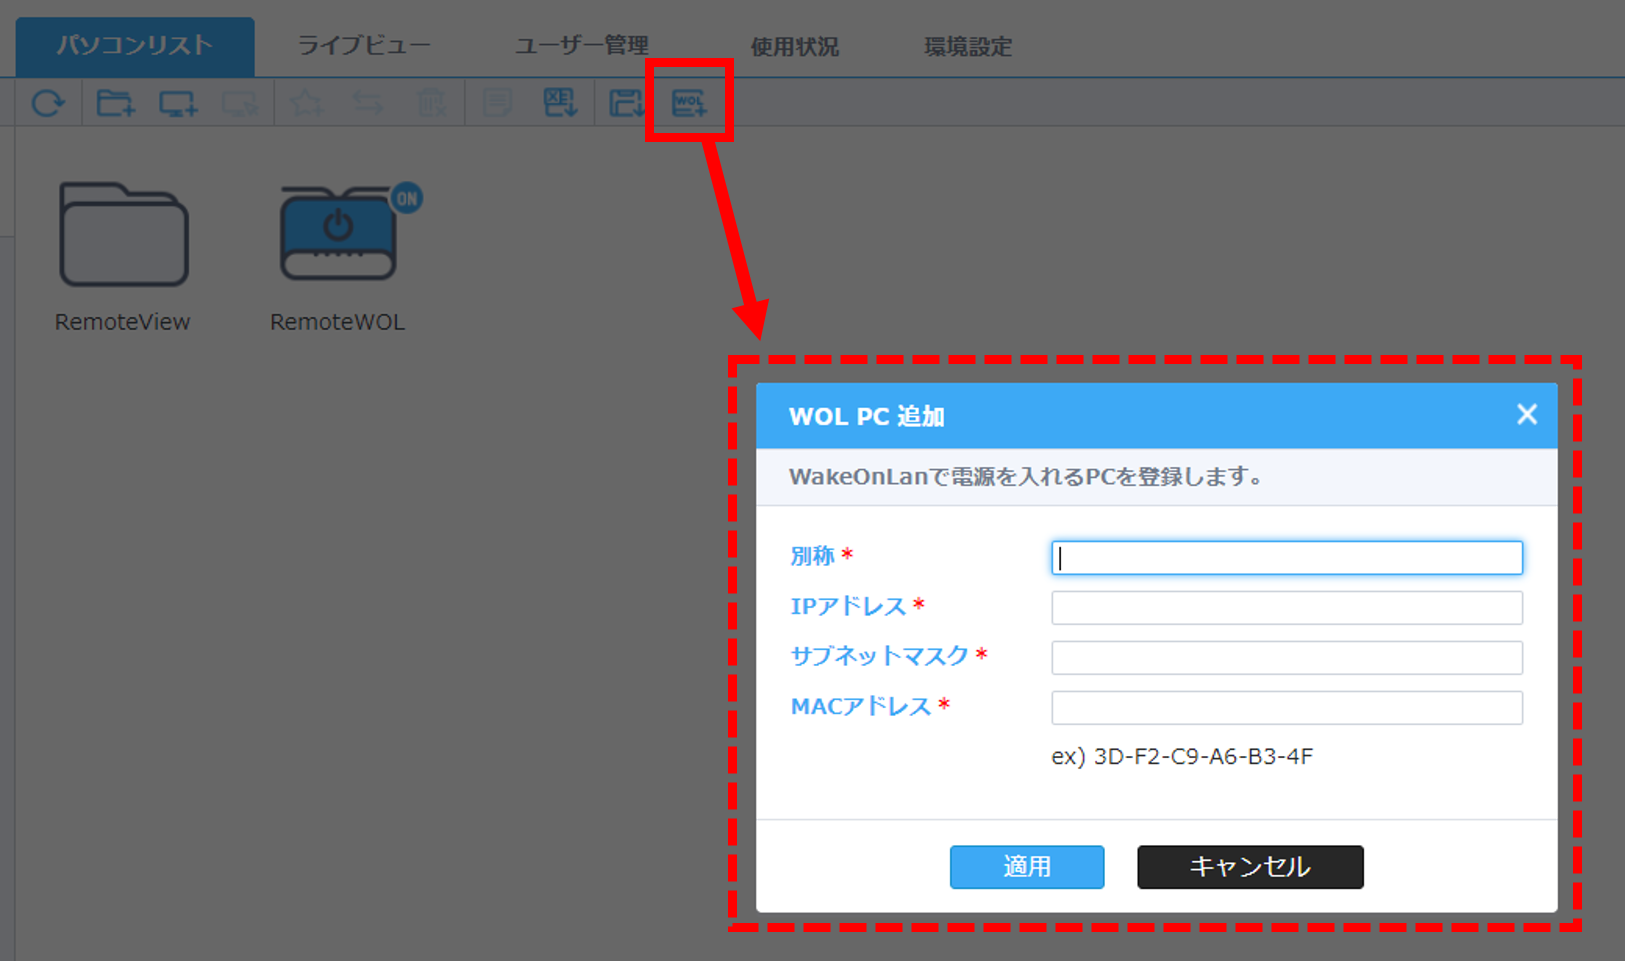 WOL PC追加」機能について – RemoteView Help Center